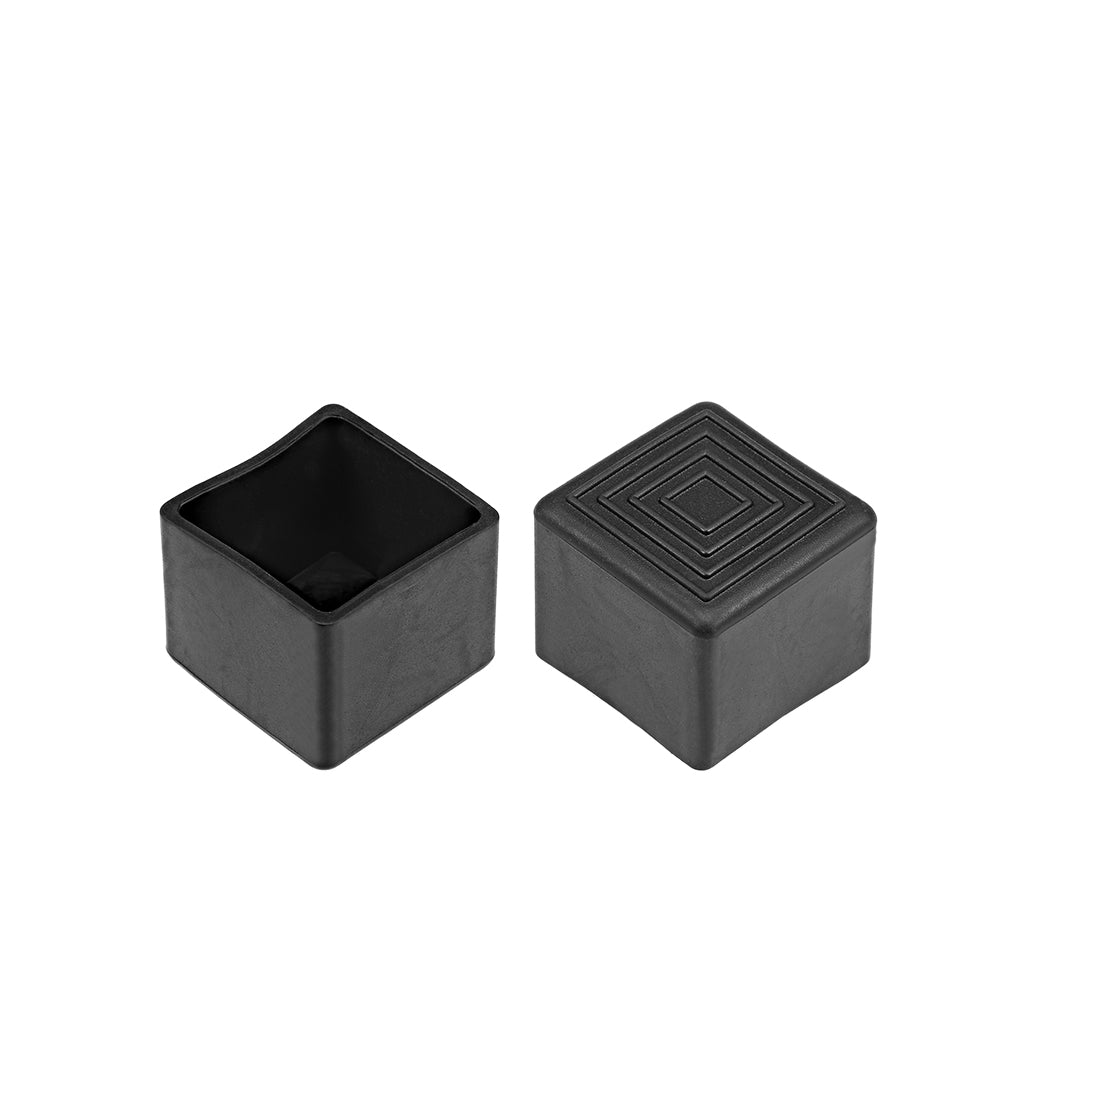 uxcell Uxcell Rubber End Caps Covers 28mm x 28mm Square Furniture Table Chair Legs 10Pcs